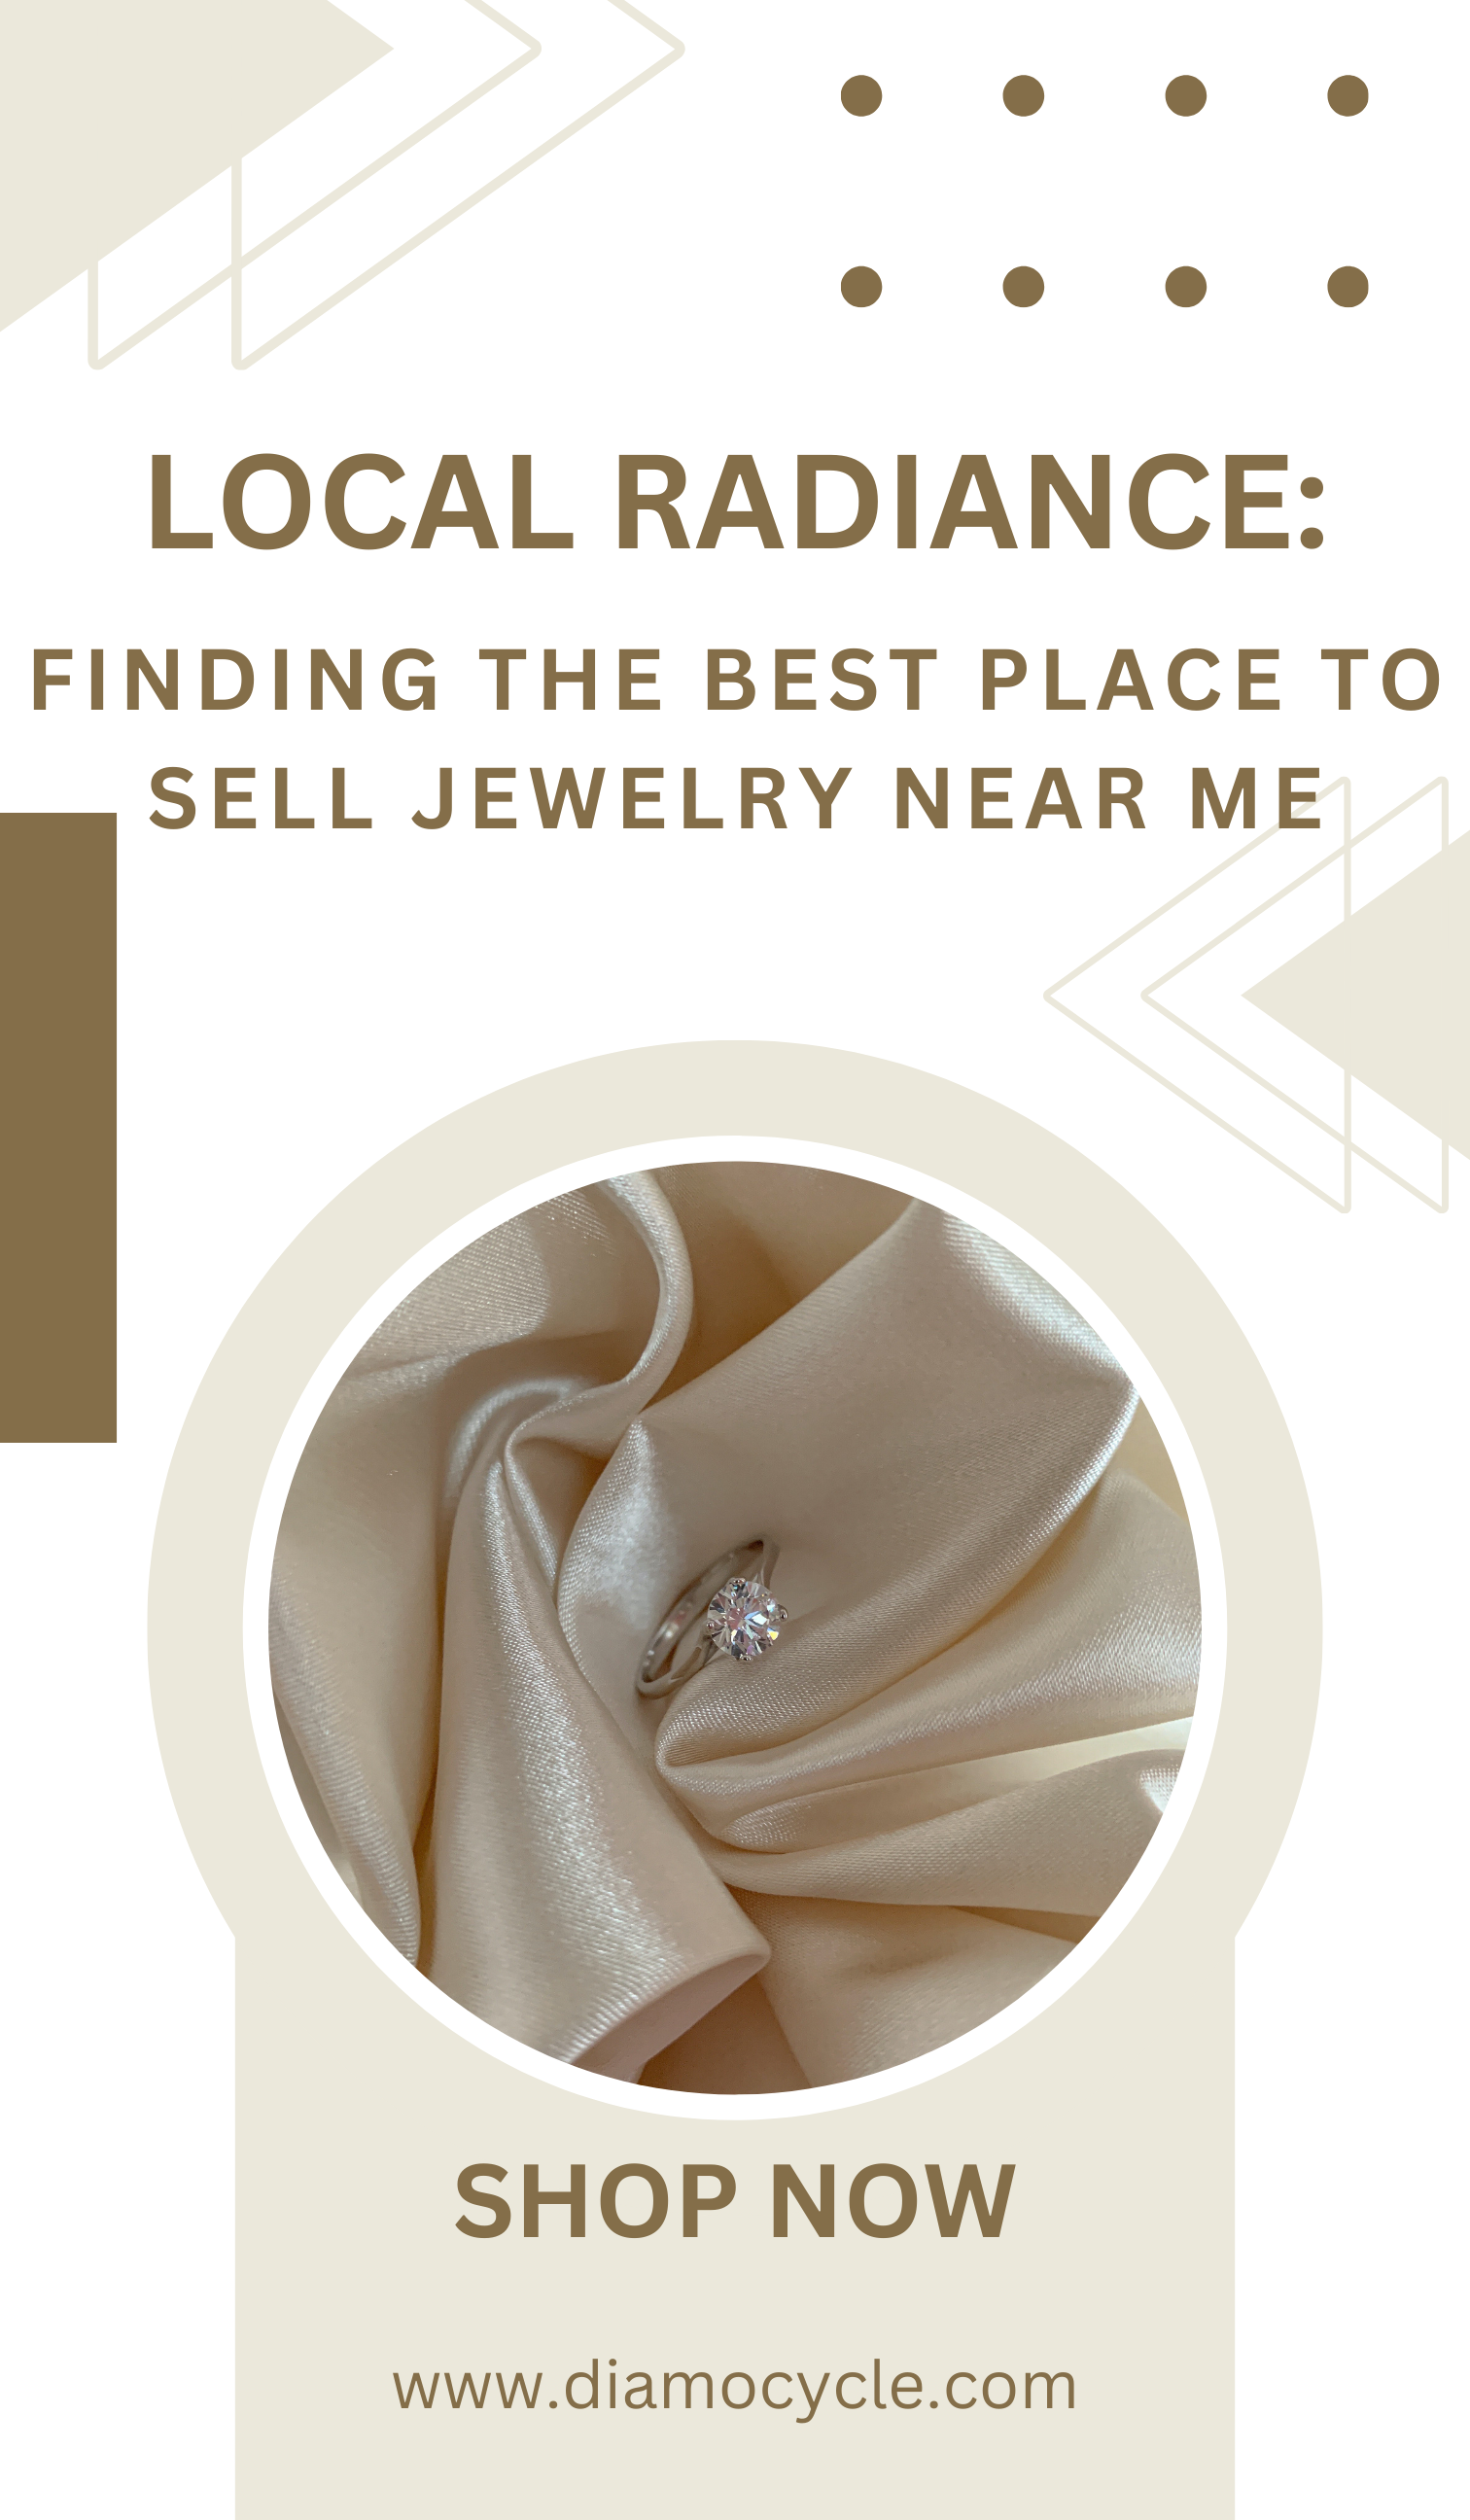 Local Radiance: Finding the Best Place to Sell Jewelry Near Me